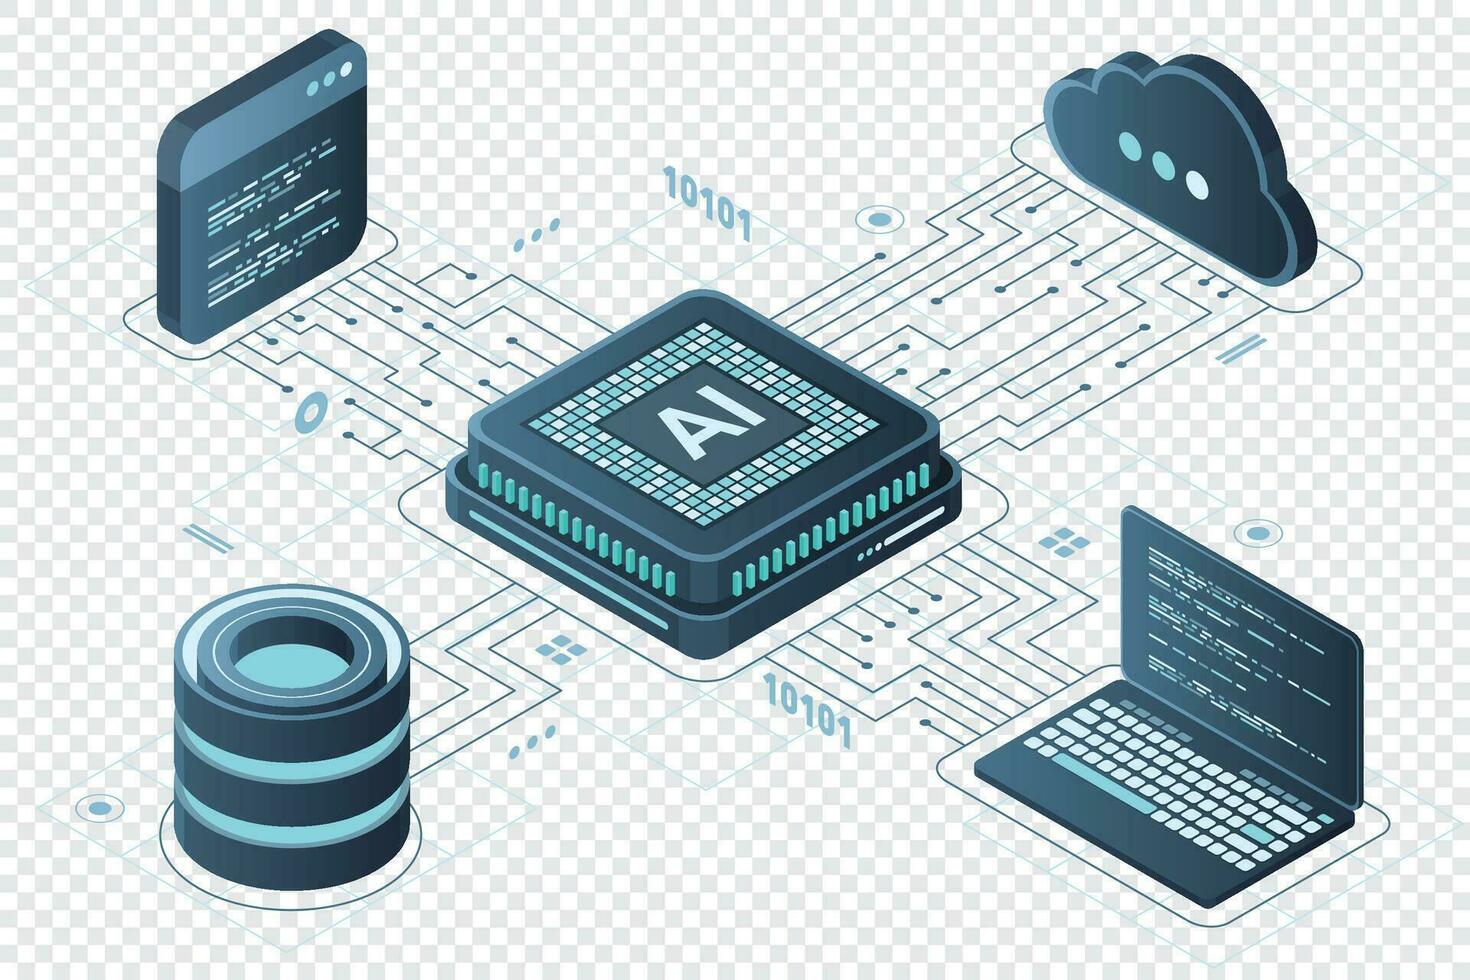 Isometric artificial intelligence chip concept. Artificial Intelligence server. Futuristic microchip processor. Isometric cloud computing. Vector illustration